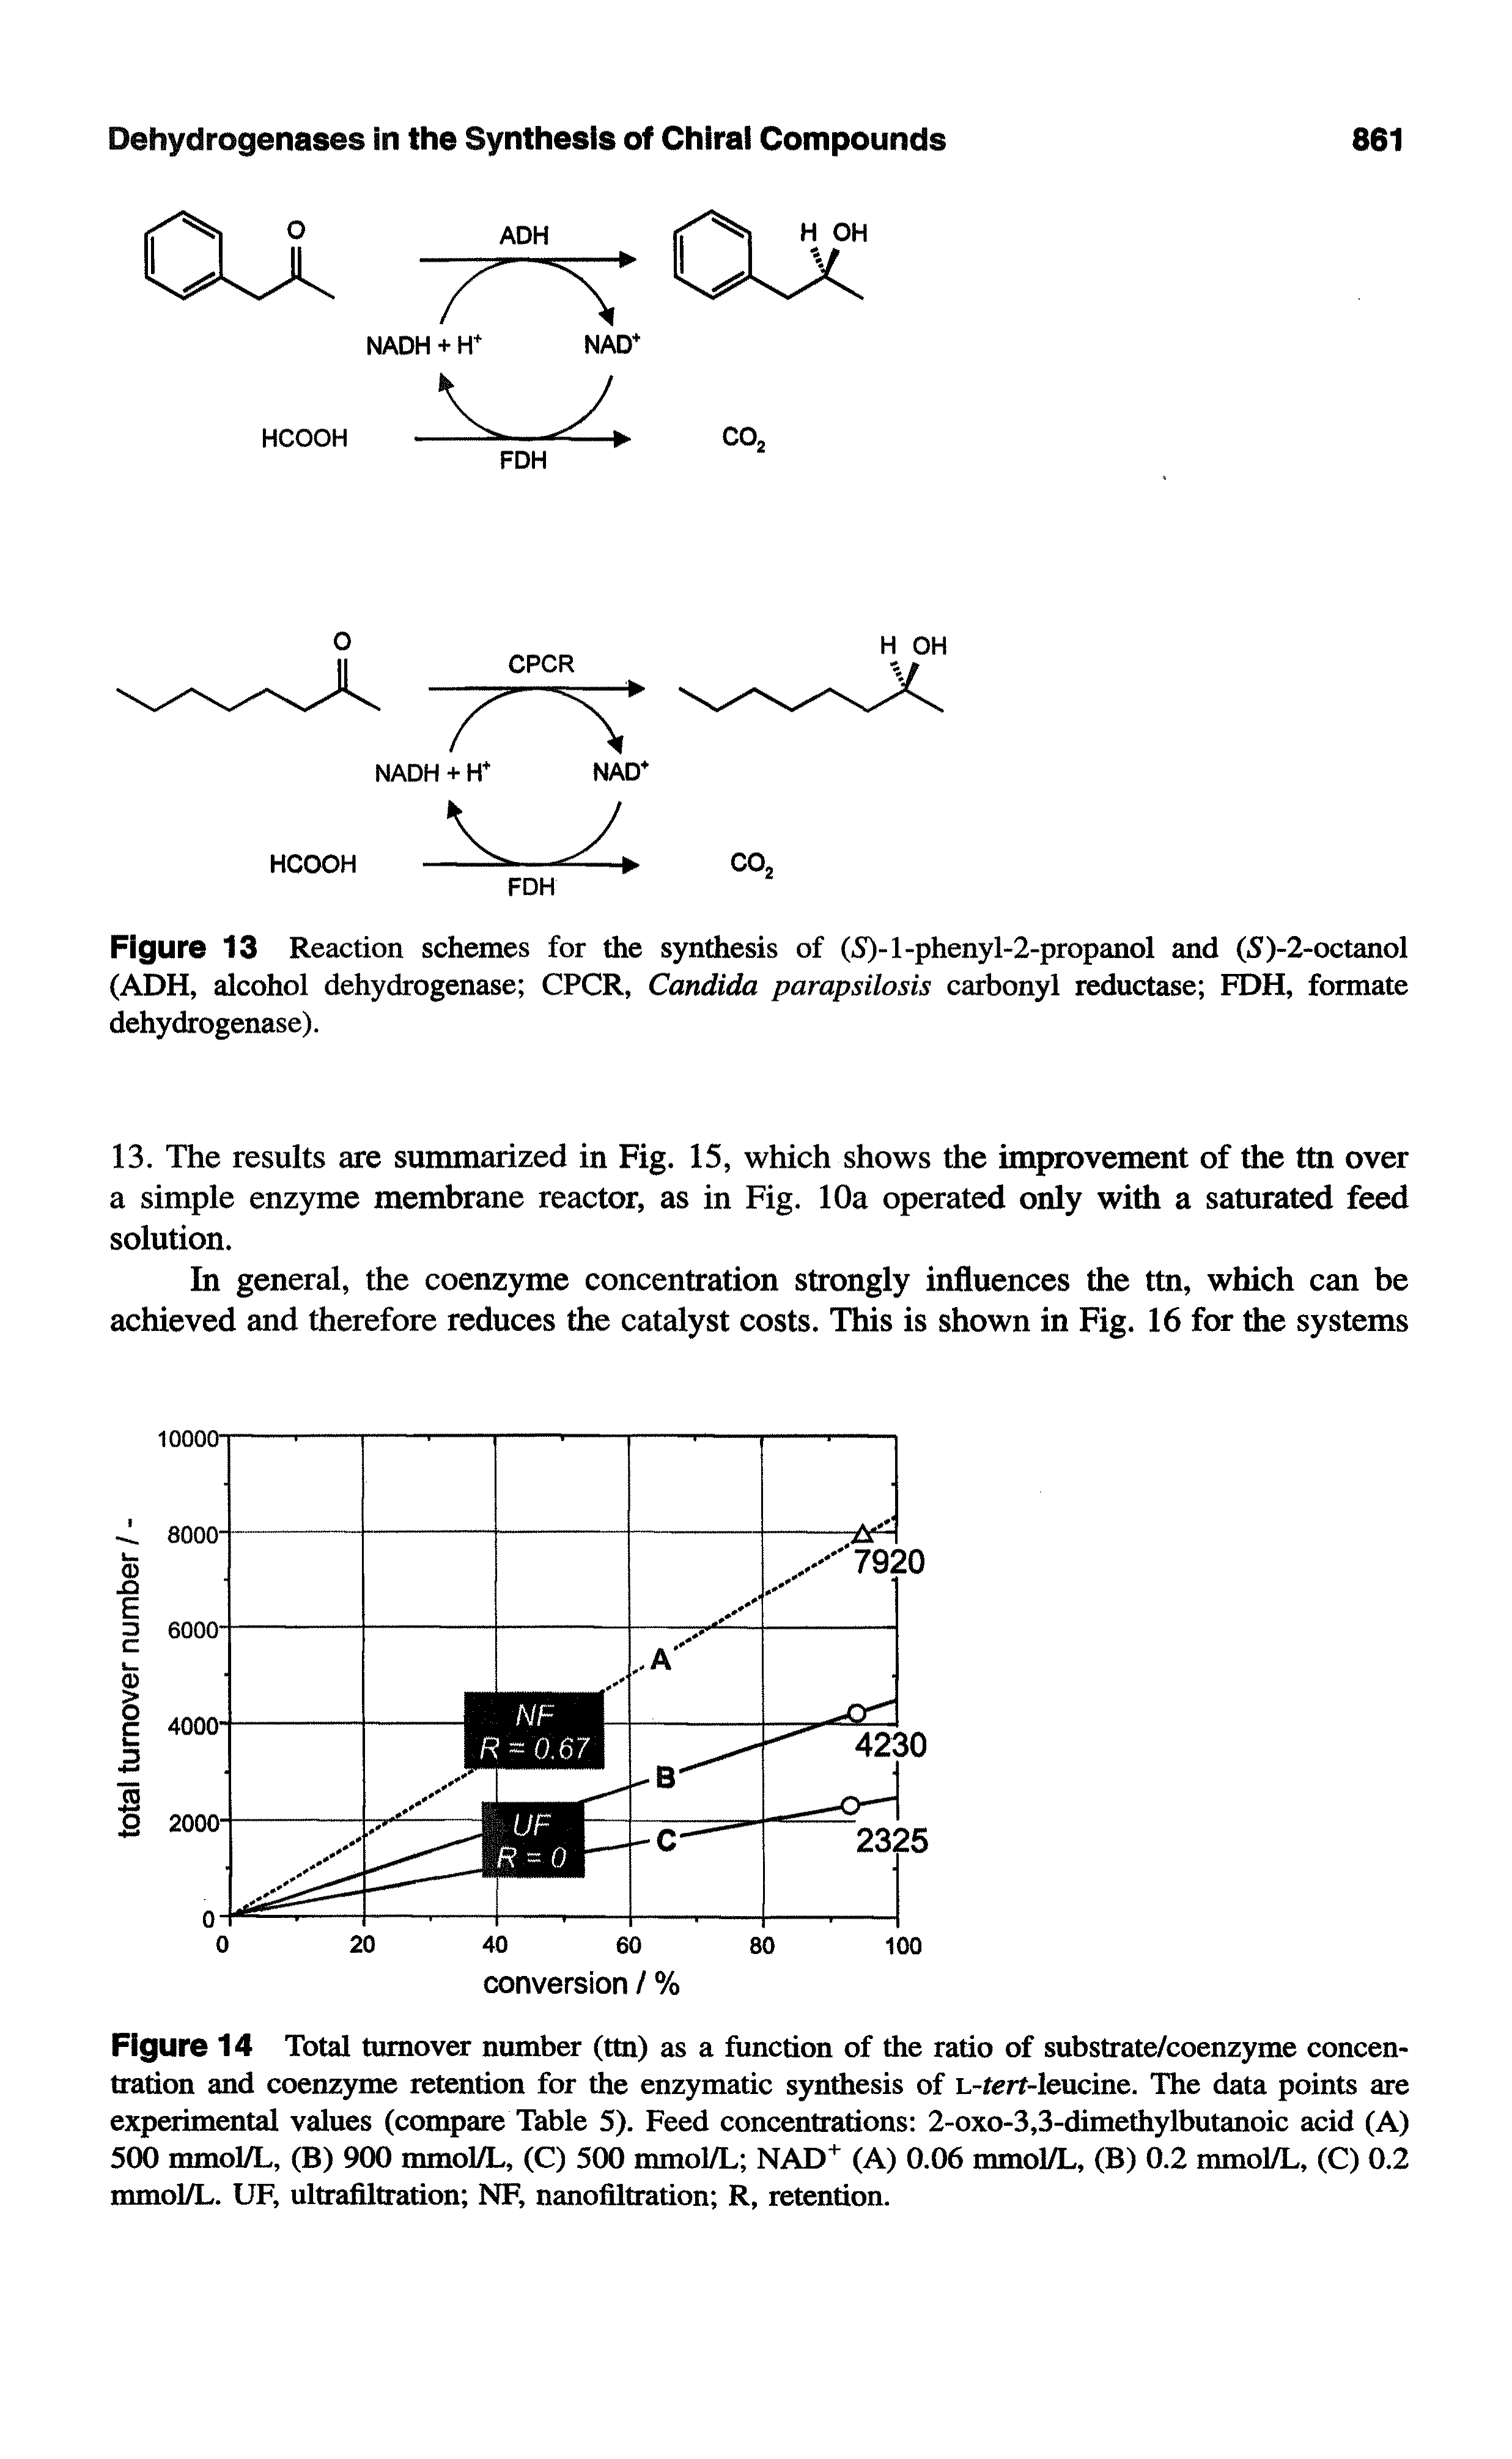 Figure 14 Total turnover number (ttn) as a function of the ratio of substrate/coenzyme concentration and coenzyme retention for the enzymatic synthesis of L-terf-leucine. The data points are experimental values (compare Table 5). Feed concentrations 2-oxo-3,3-dimethylbutanoic acid (A) 500 mmol/L, (B) 900 mmol/L, (C) 500 mmol/L NAD (A) 0.06 mmol/L, (B) 0.2 mmol/L, (C) 0.2 mmol/L. UF, ultrafiltration NF, nanofiltration R, retention.